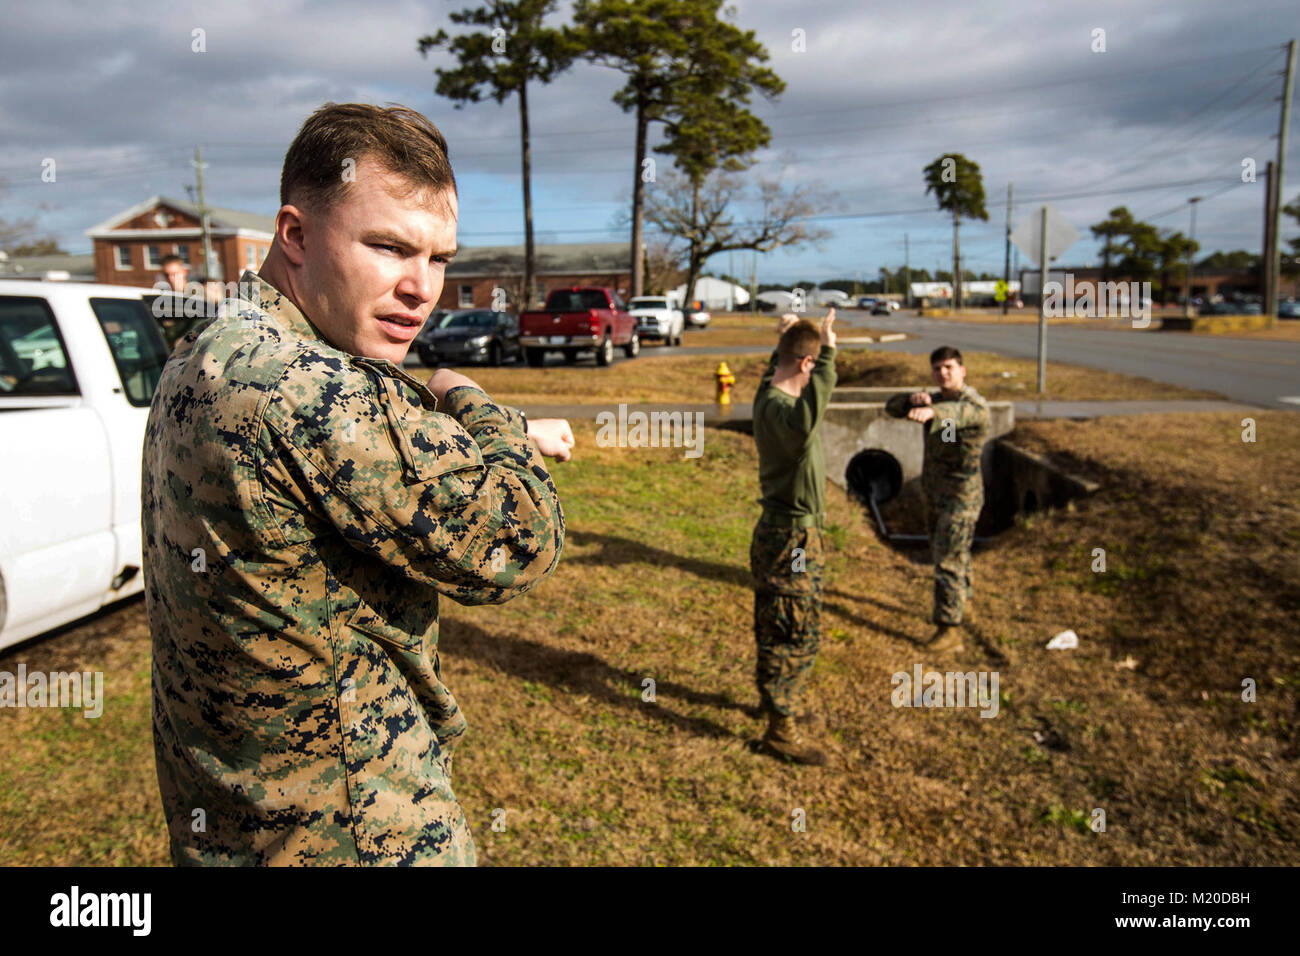 U.S. Marines with Battalion Landing Team, 2nd Battalion, 6th Marine Regiment, 26th Marine Expeditionary Unit (MEU), apprehend a simulated suspect during vehicle-borne improvised explosive device (VBIED) training on Camp Lejeune, N.C., Jan. 11, 2018. The two-day course was held to educate Marines on the proper procedures of inspecting vehicles and civilians for potential threats while also giving them the opportunity to practice techniques in preparation for the upcoming deployment. (U.S. Marine Corps Stock Photo